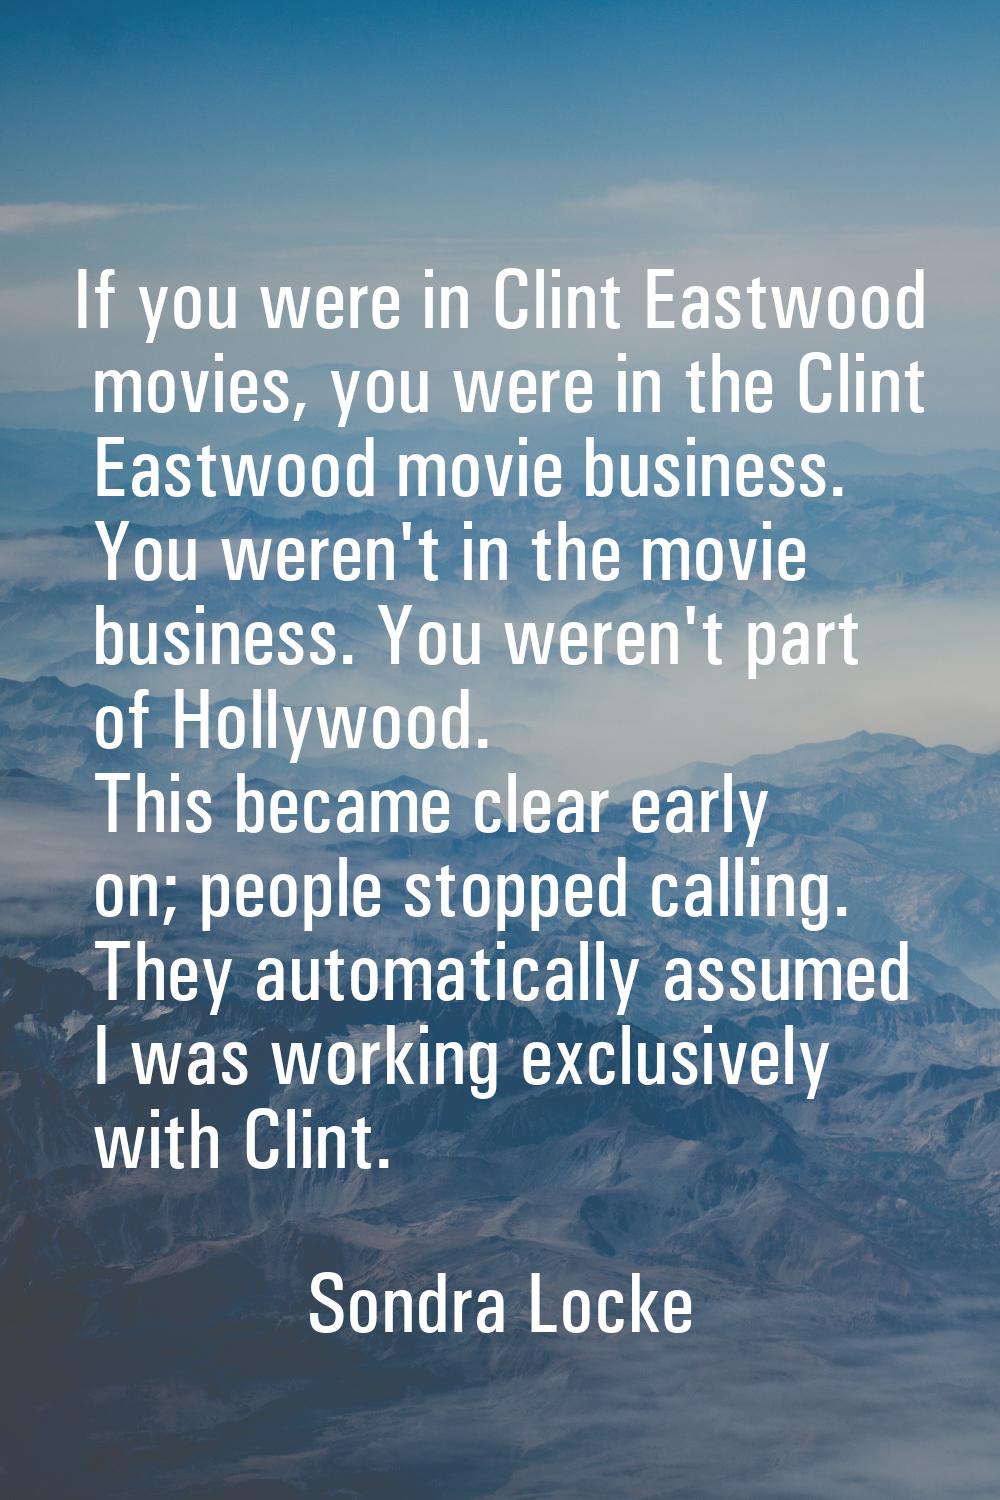 If you were in Clint Eastwood movies, you were in the Clint Eastwood movie business. You weren't in